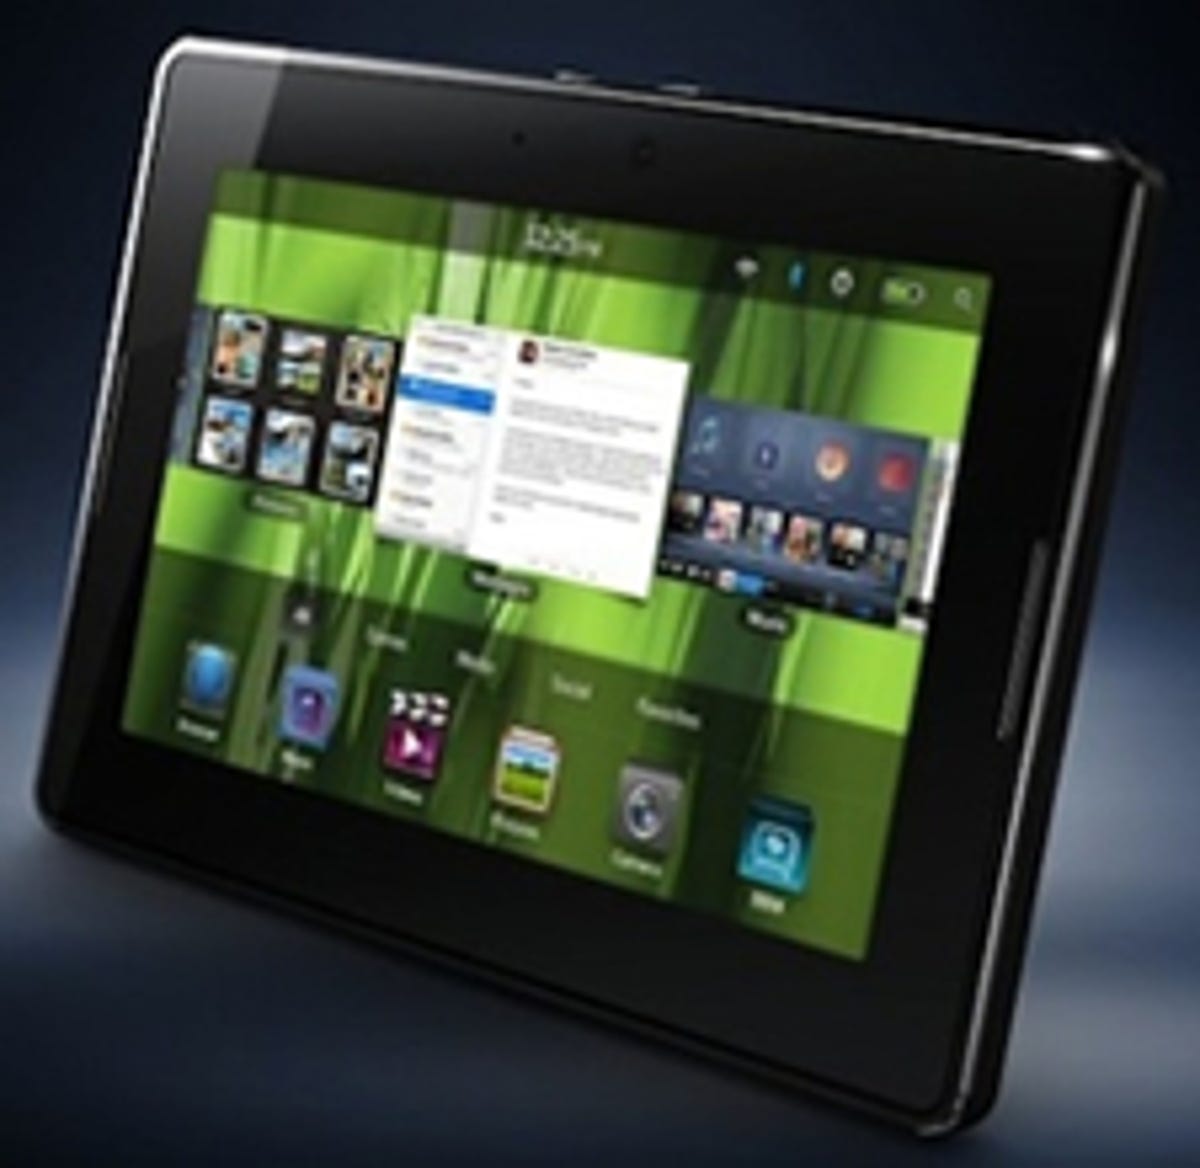 RIM's first tablet gets a launch target and price tag.